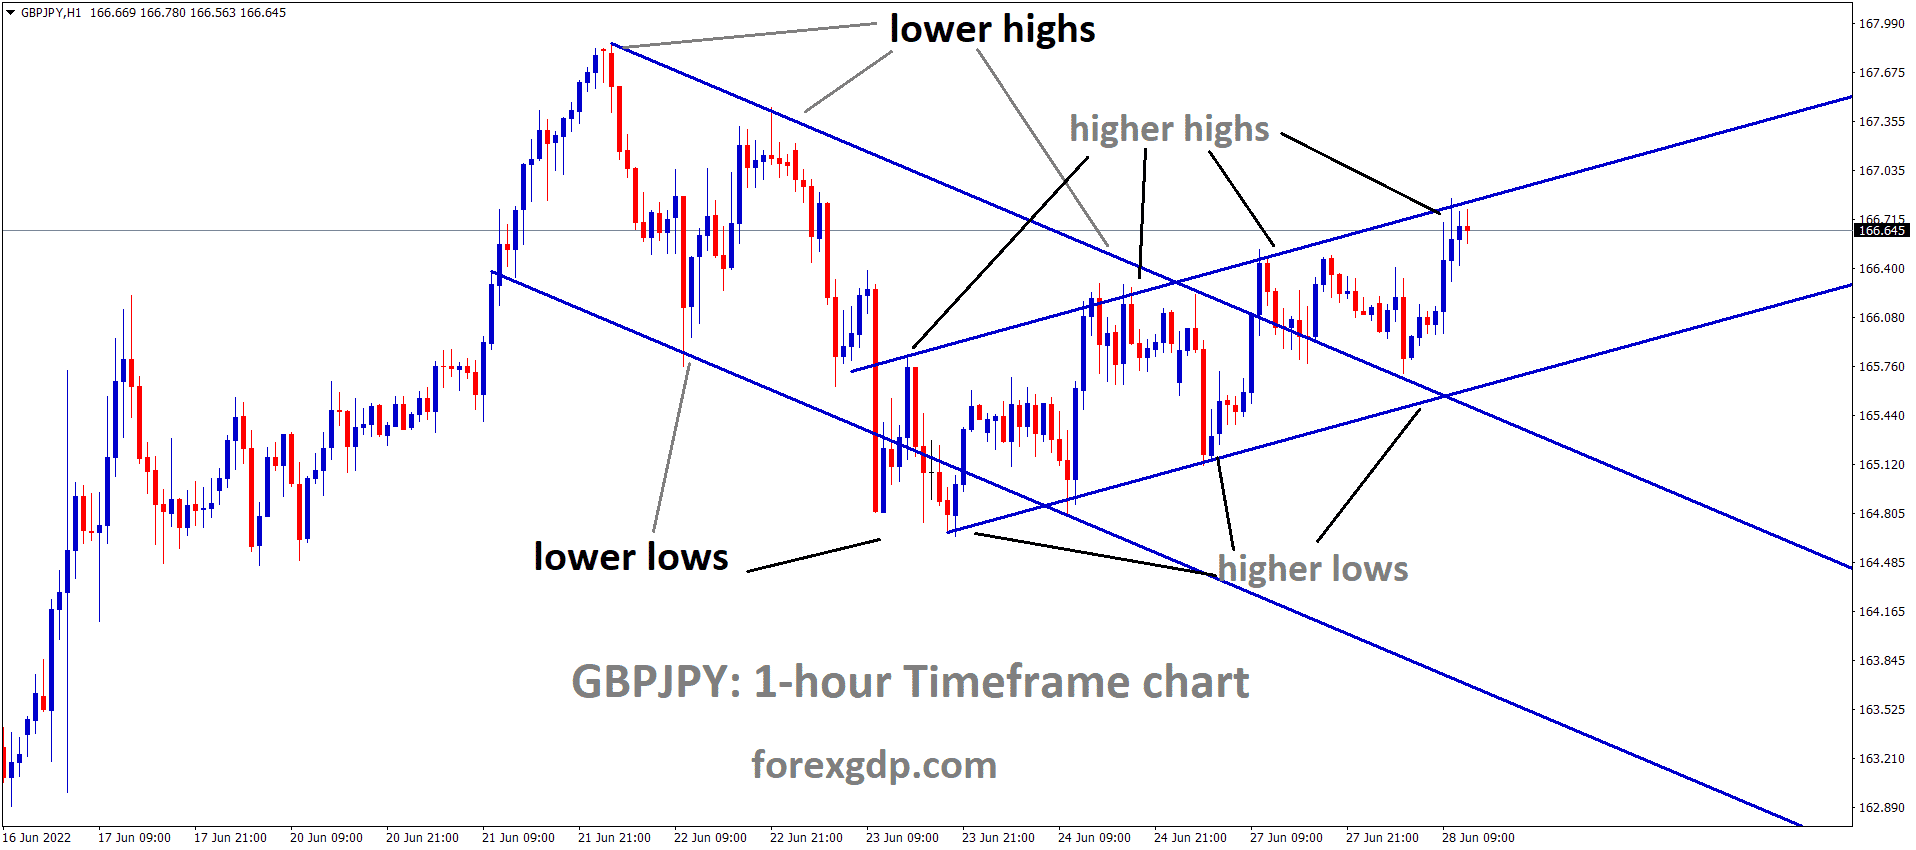 GBPJPY is moving in an Ascending channel and the Market has Fallen from the higher high area of the channel